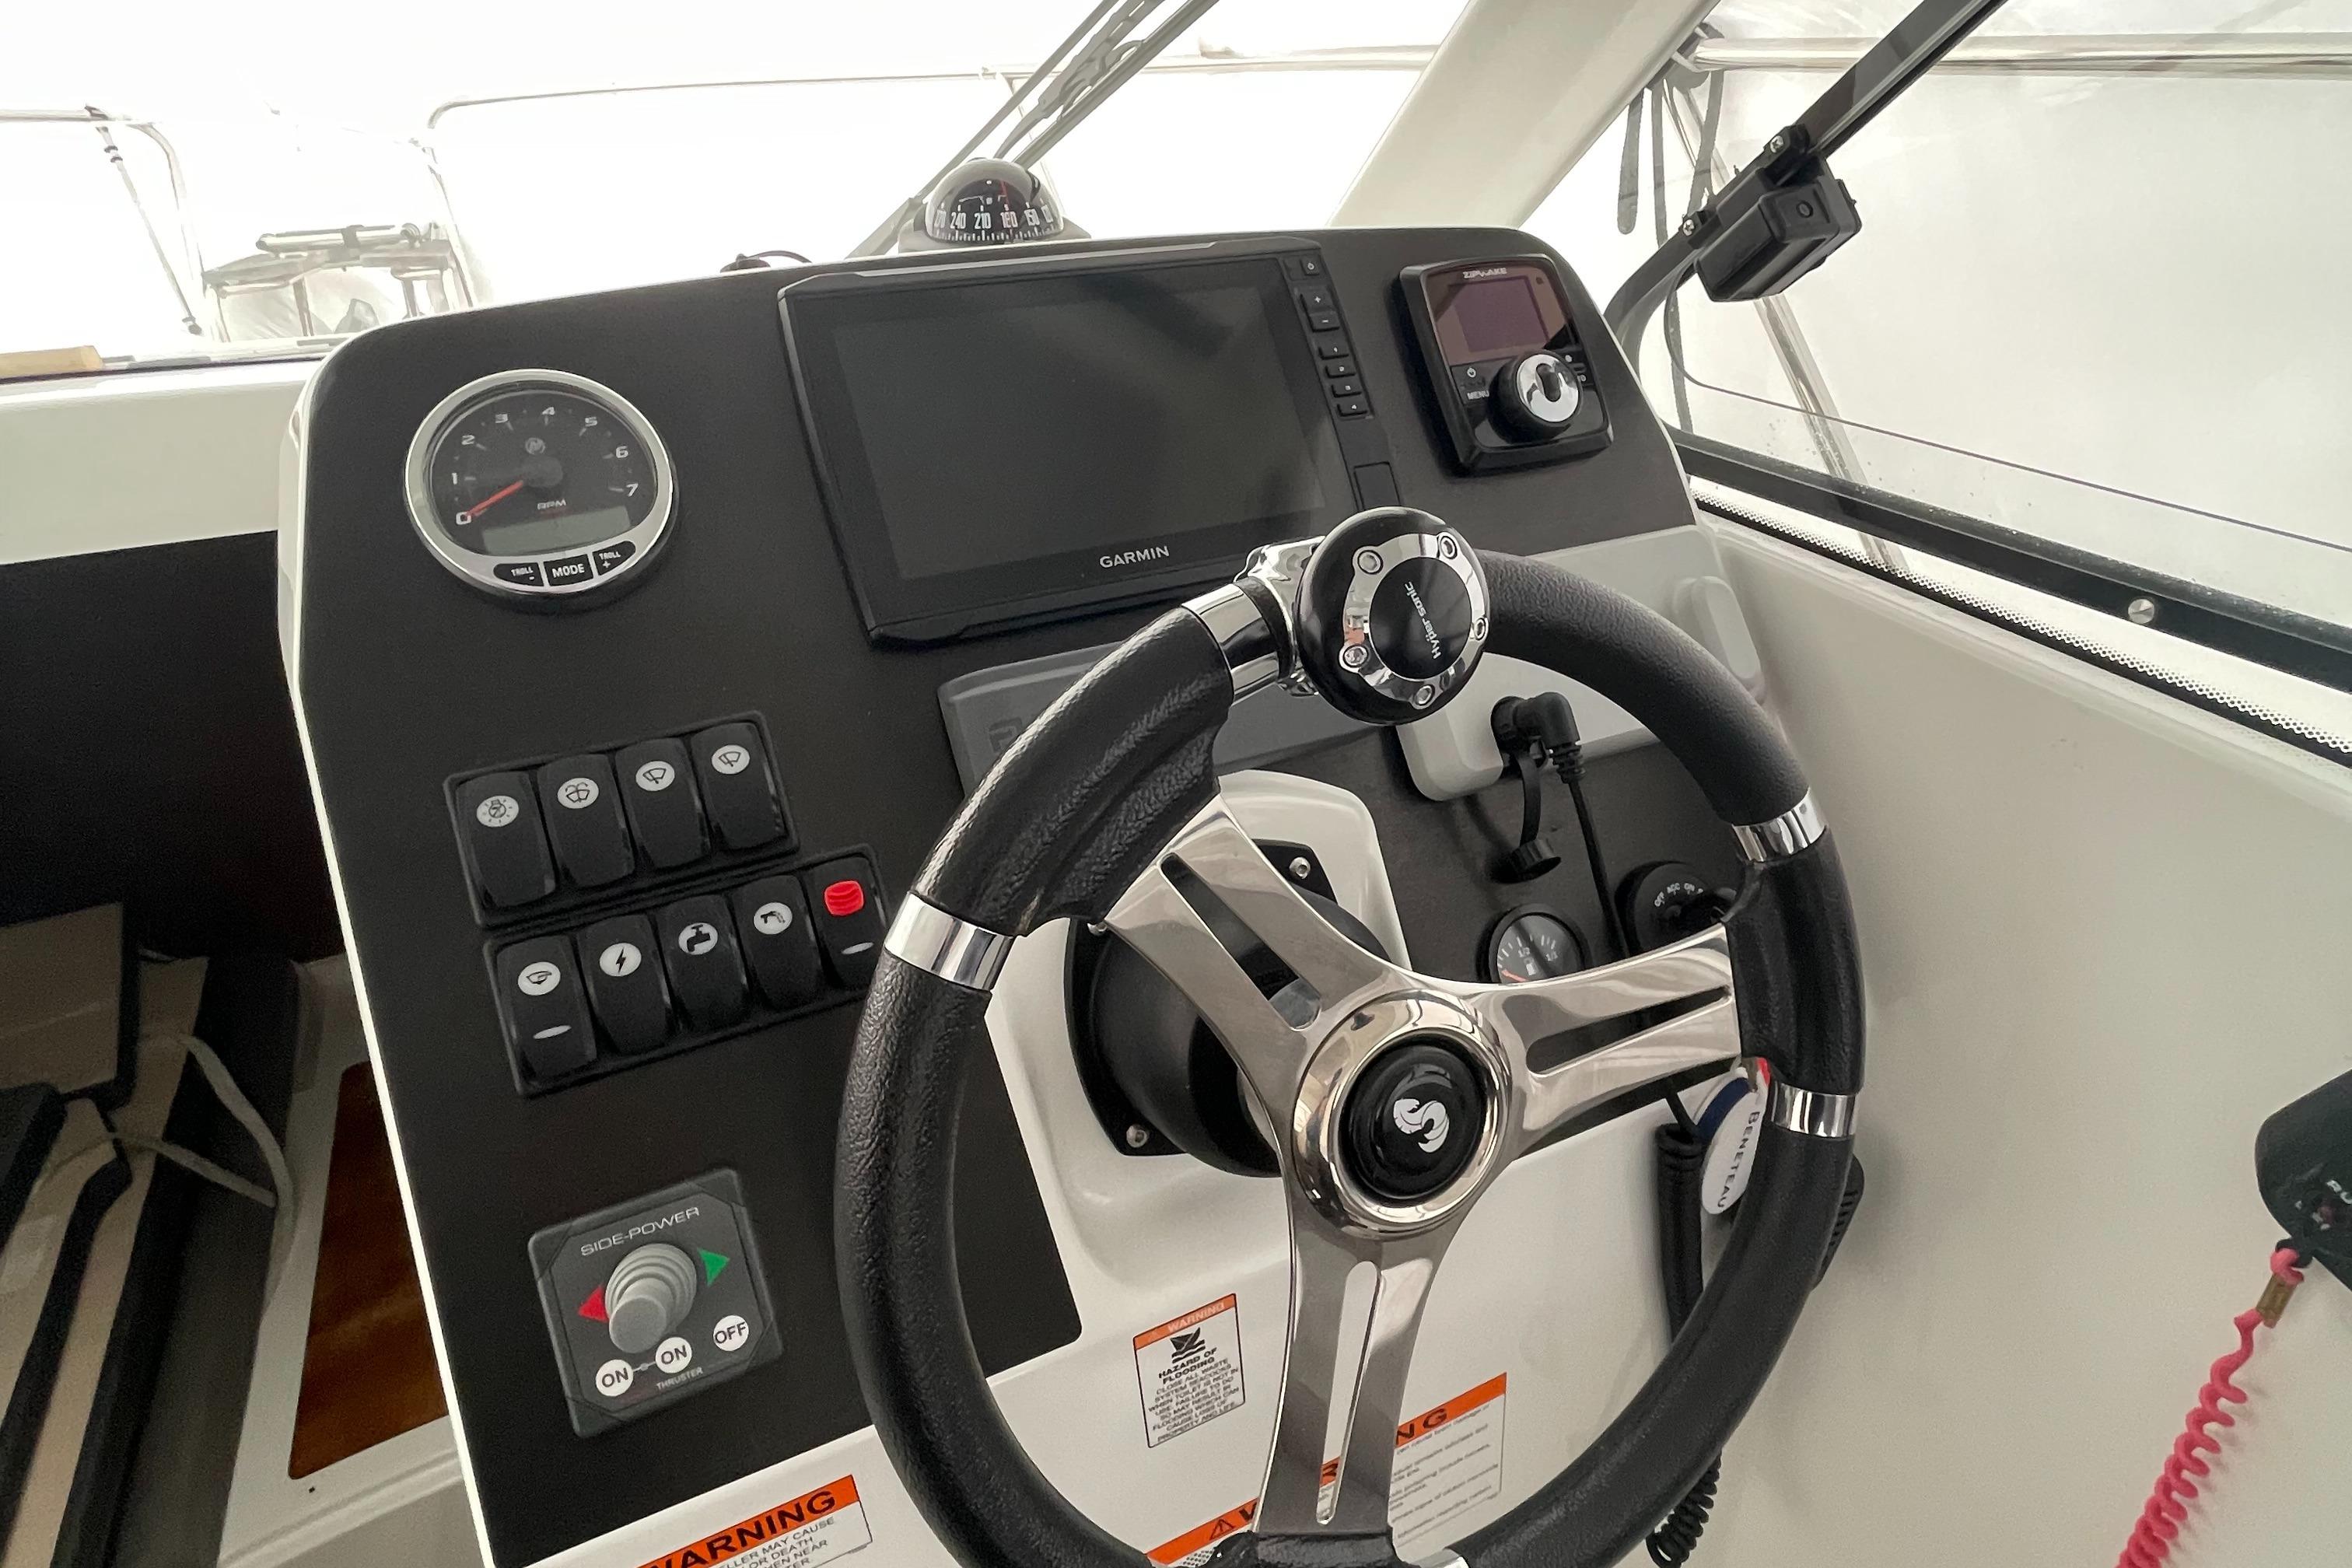 Helm with GPS